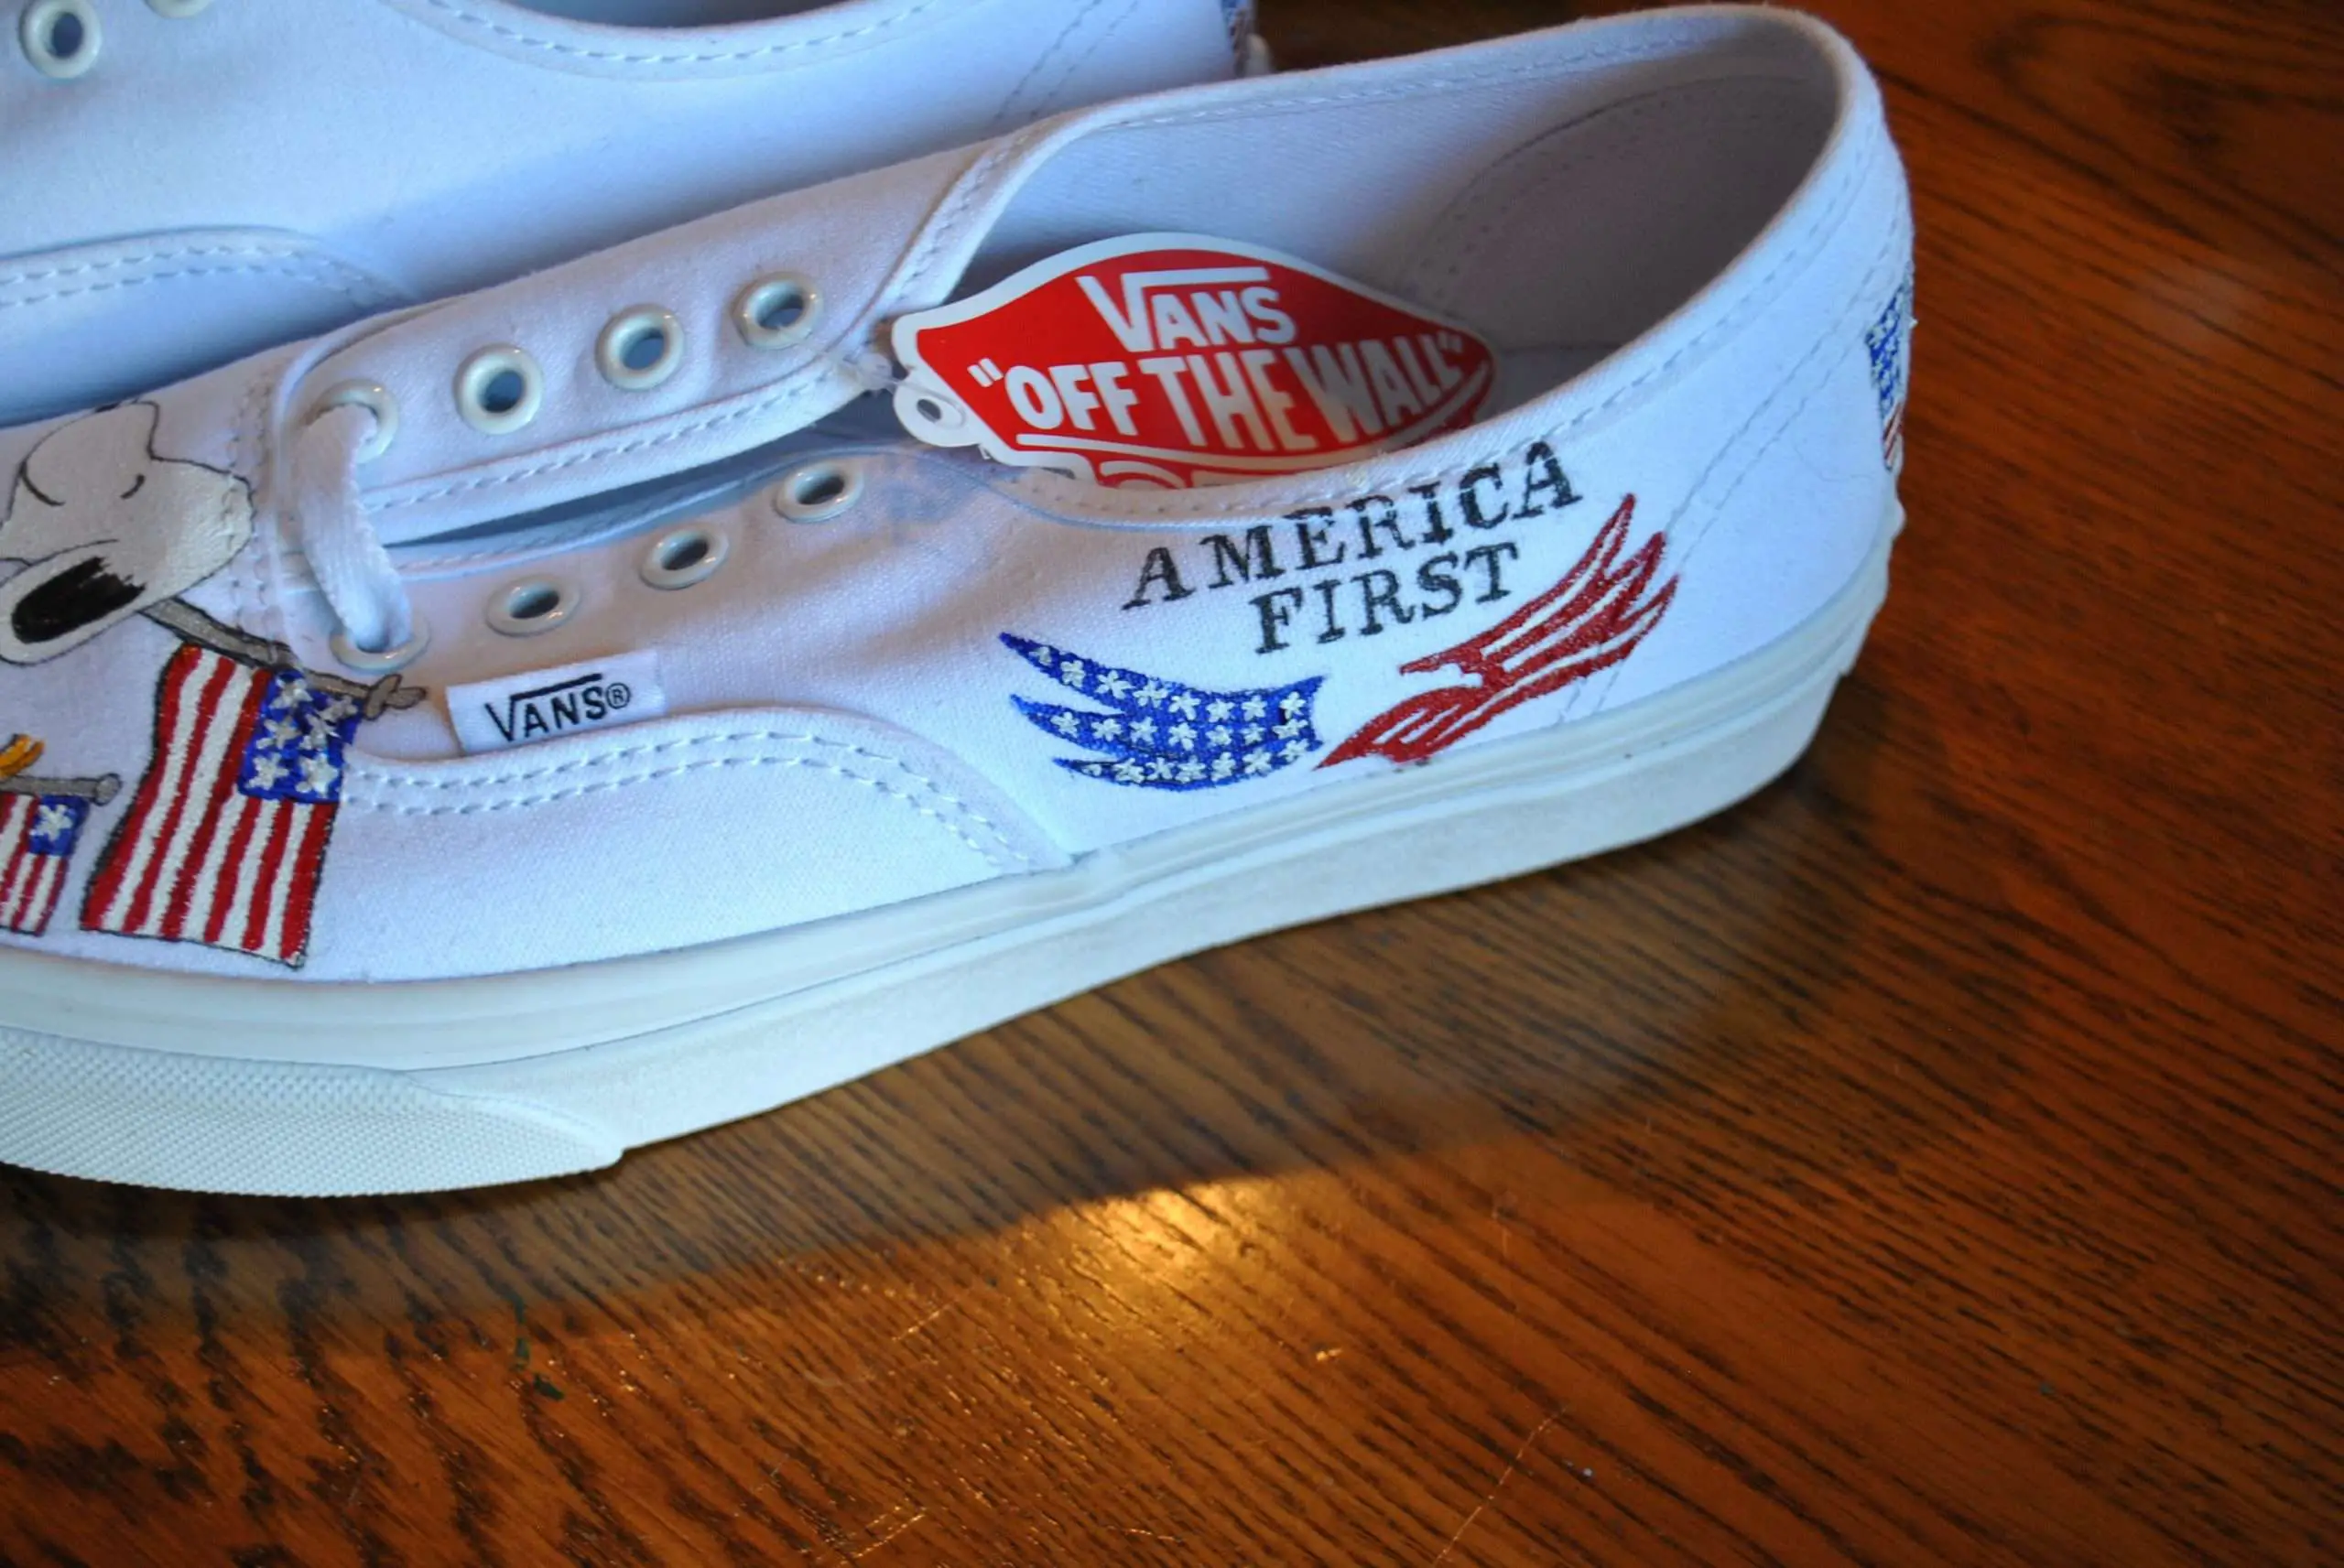 Snoopy 4th of July Celebrations Vans shoes included in ...